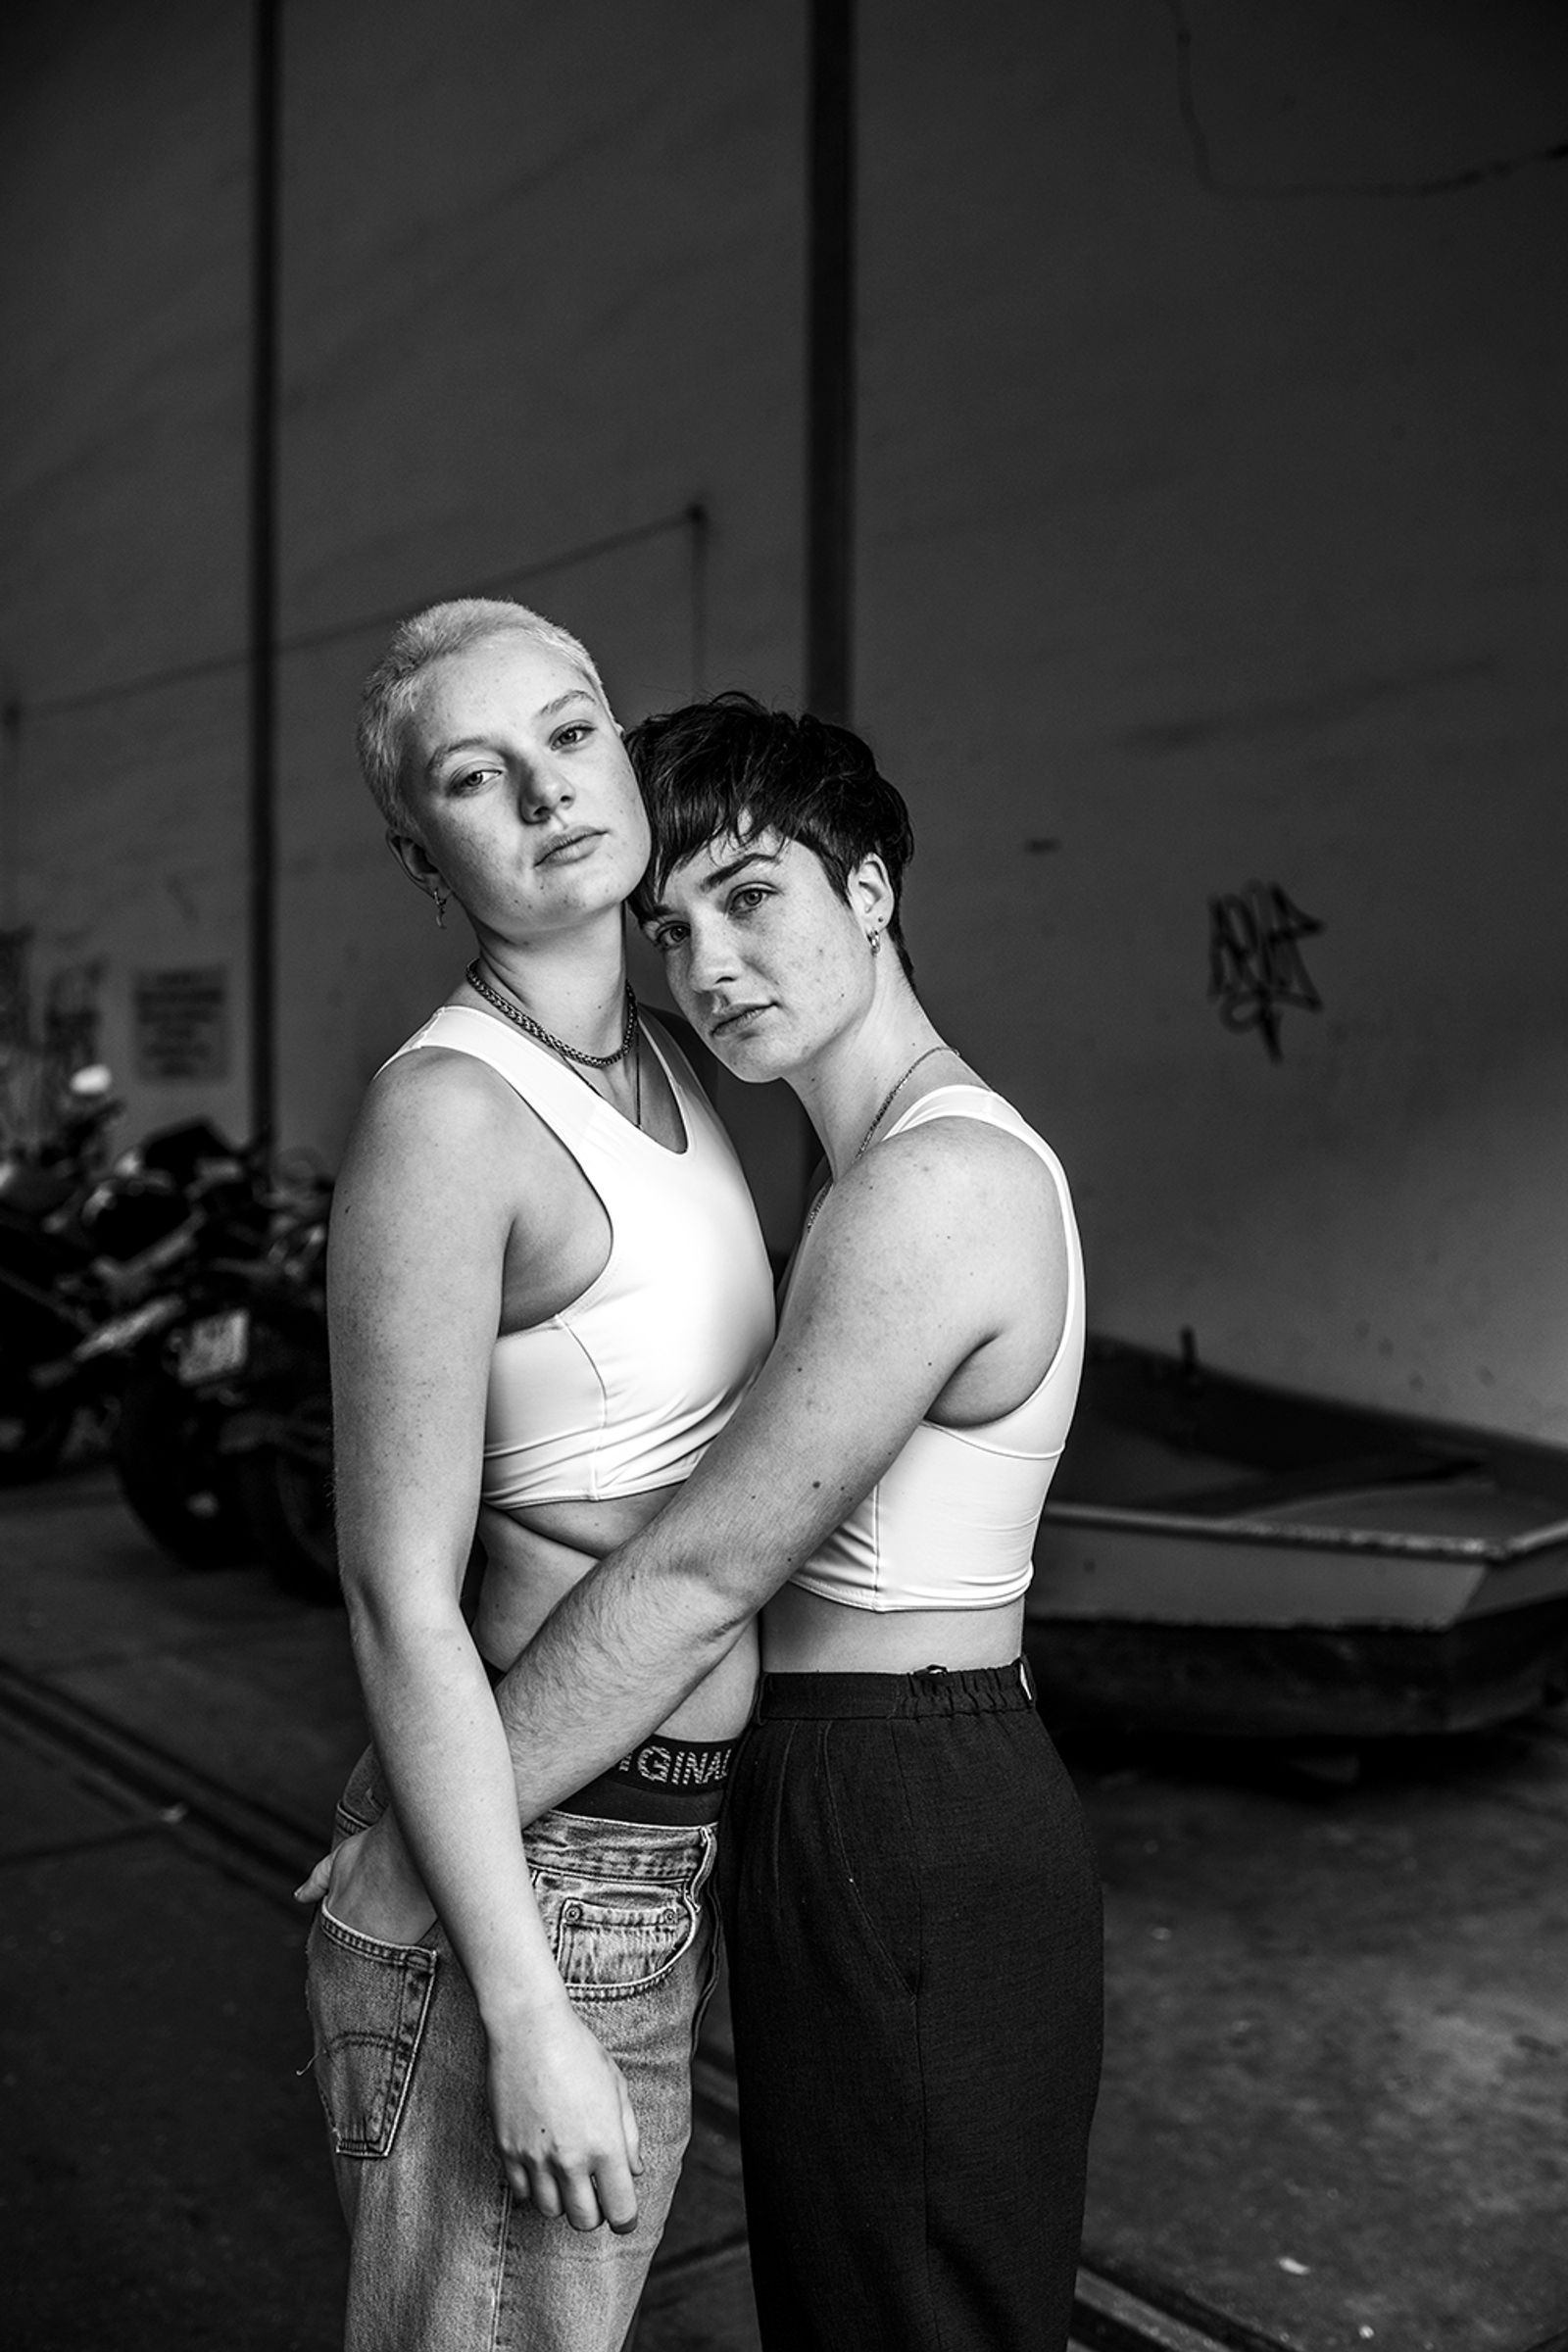 © Carla Kogelman - Image from the Freedom of Gender photography project